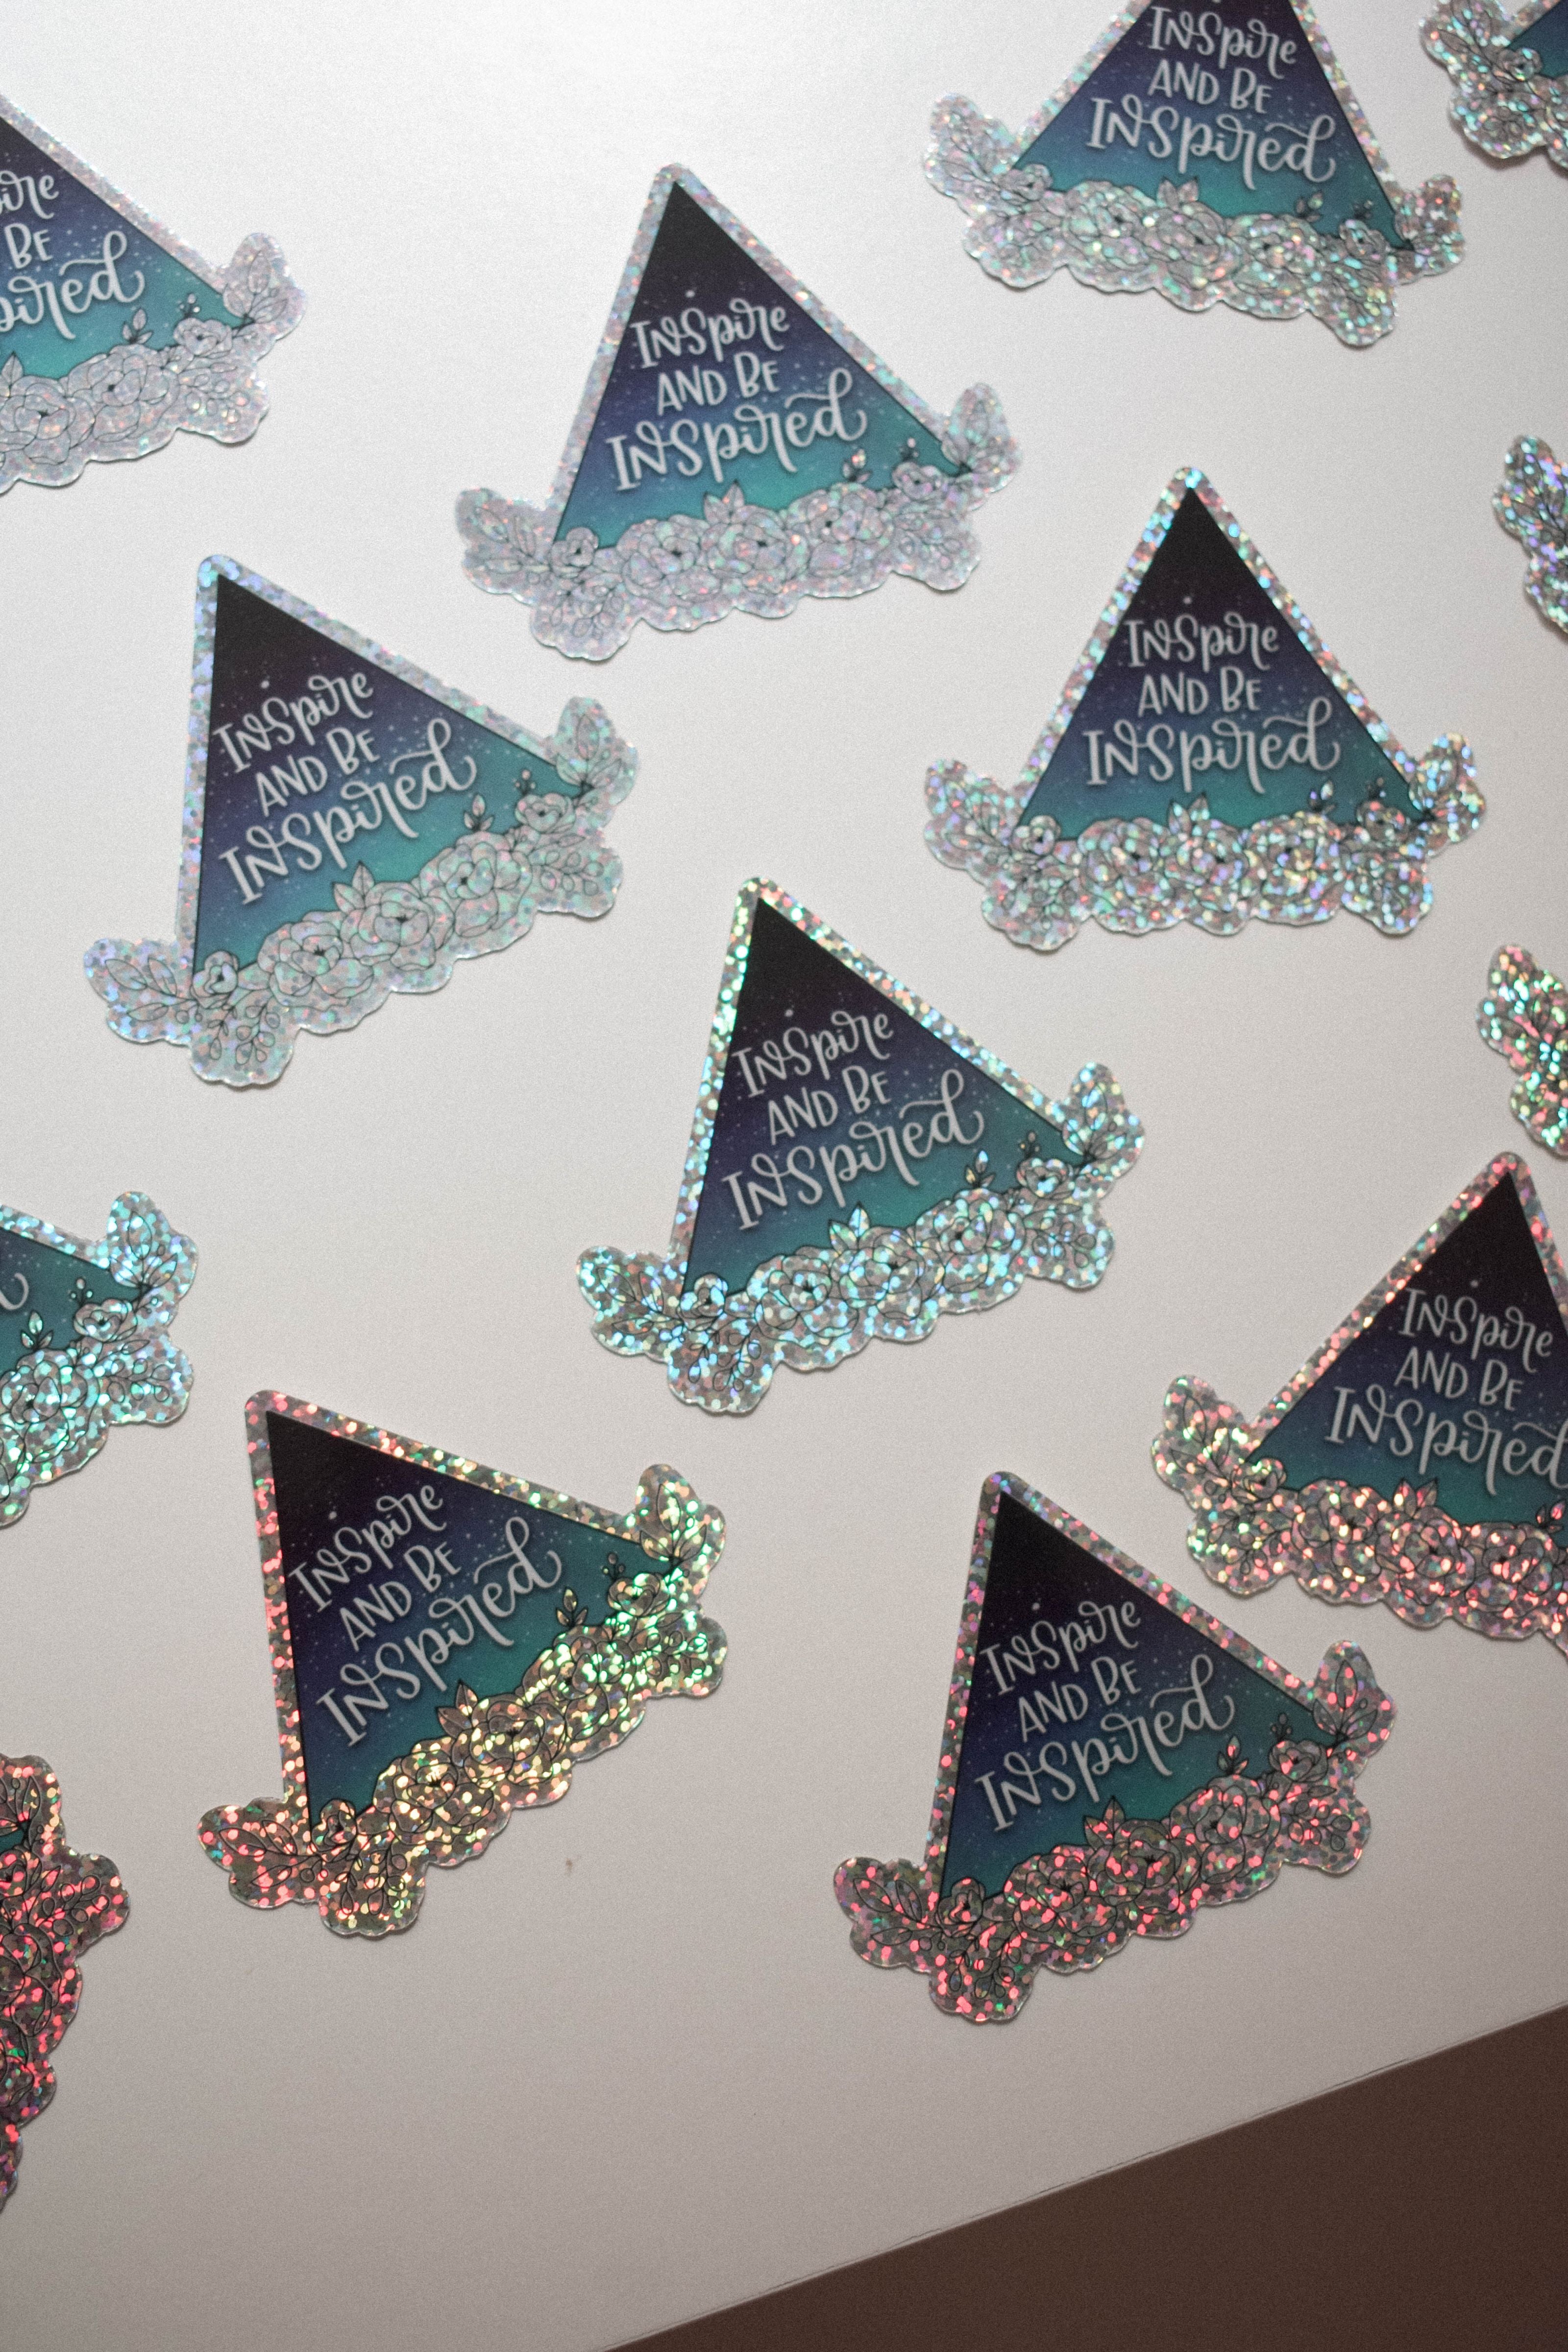 Glitter Vinyl Stickers / Inspired and Be Inspired